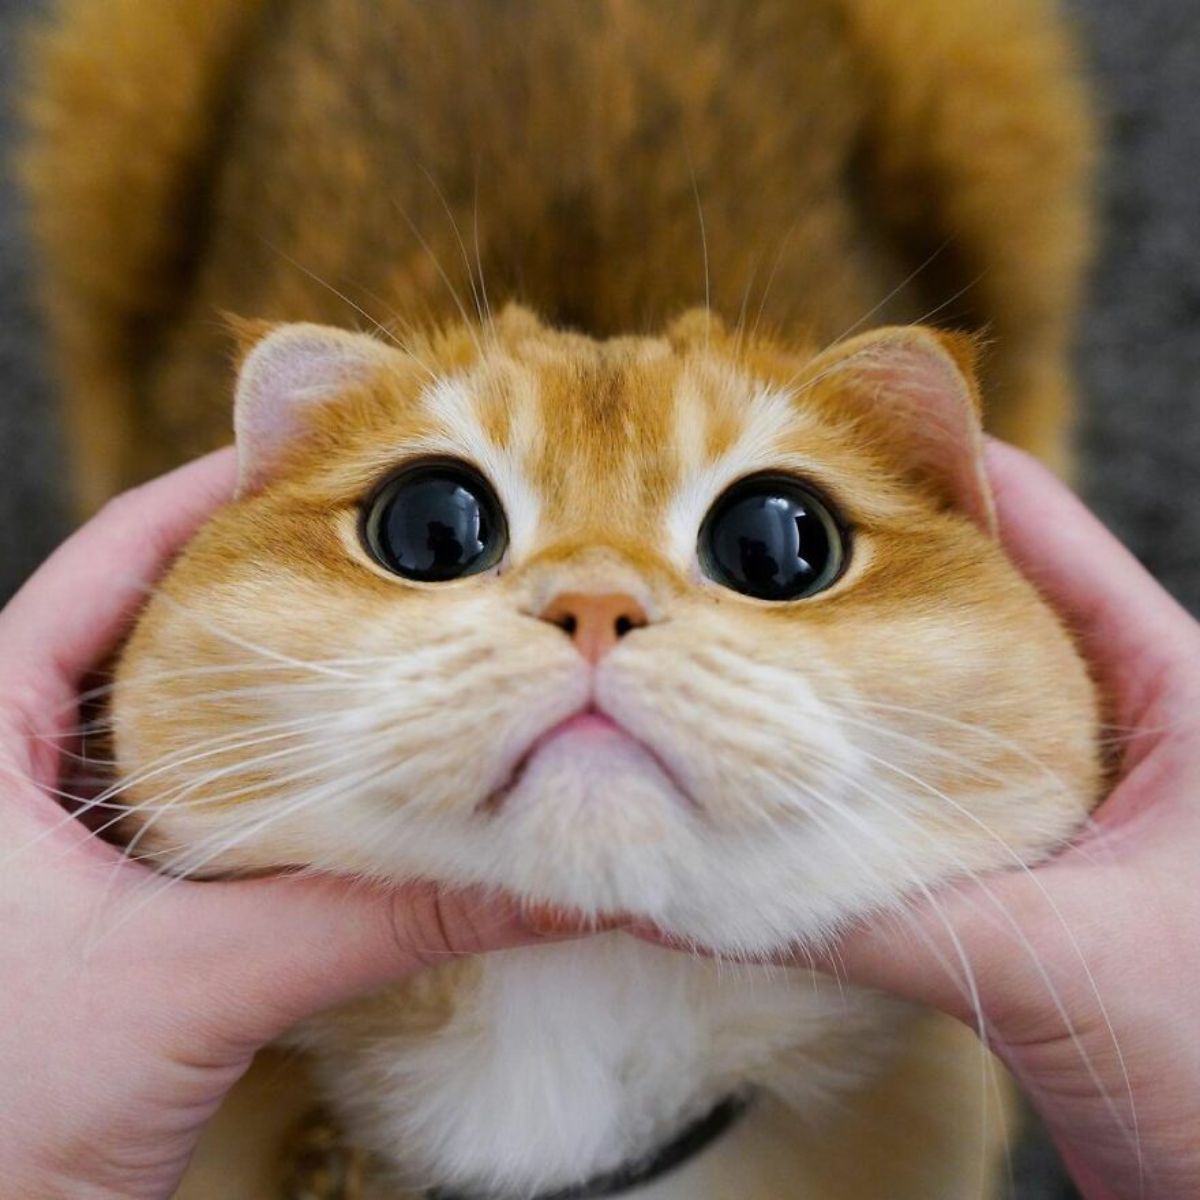 orange cat with large black eyes has its face held by someone's hands